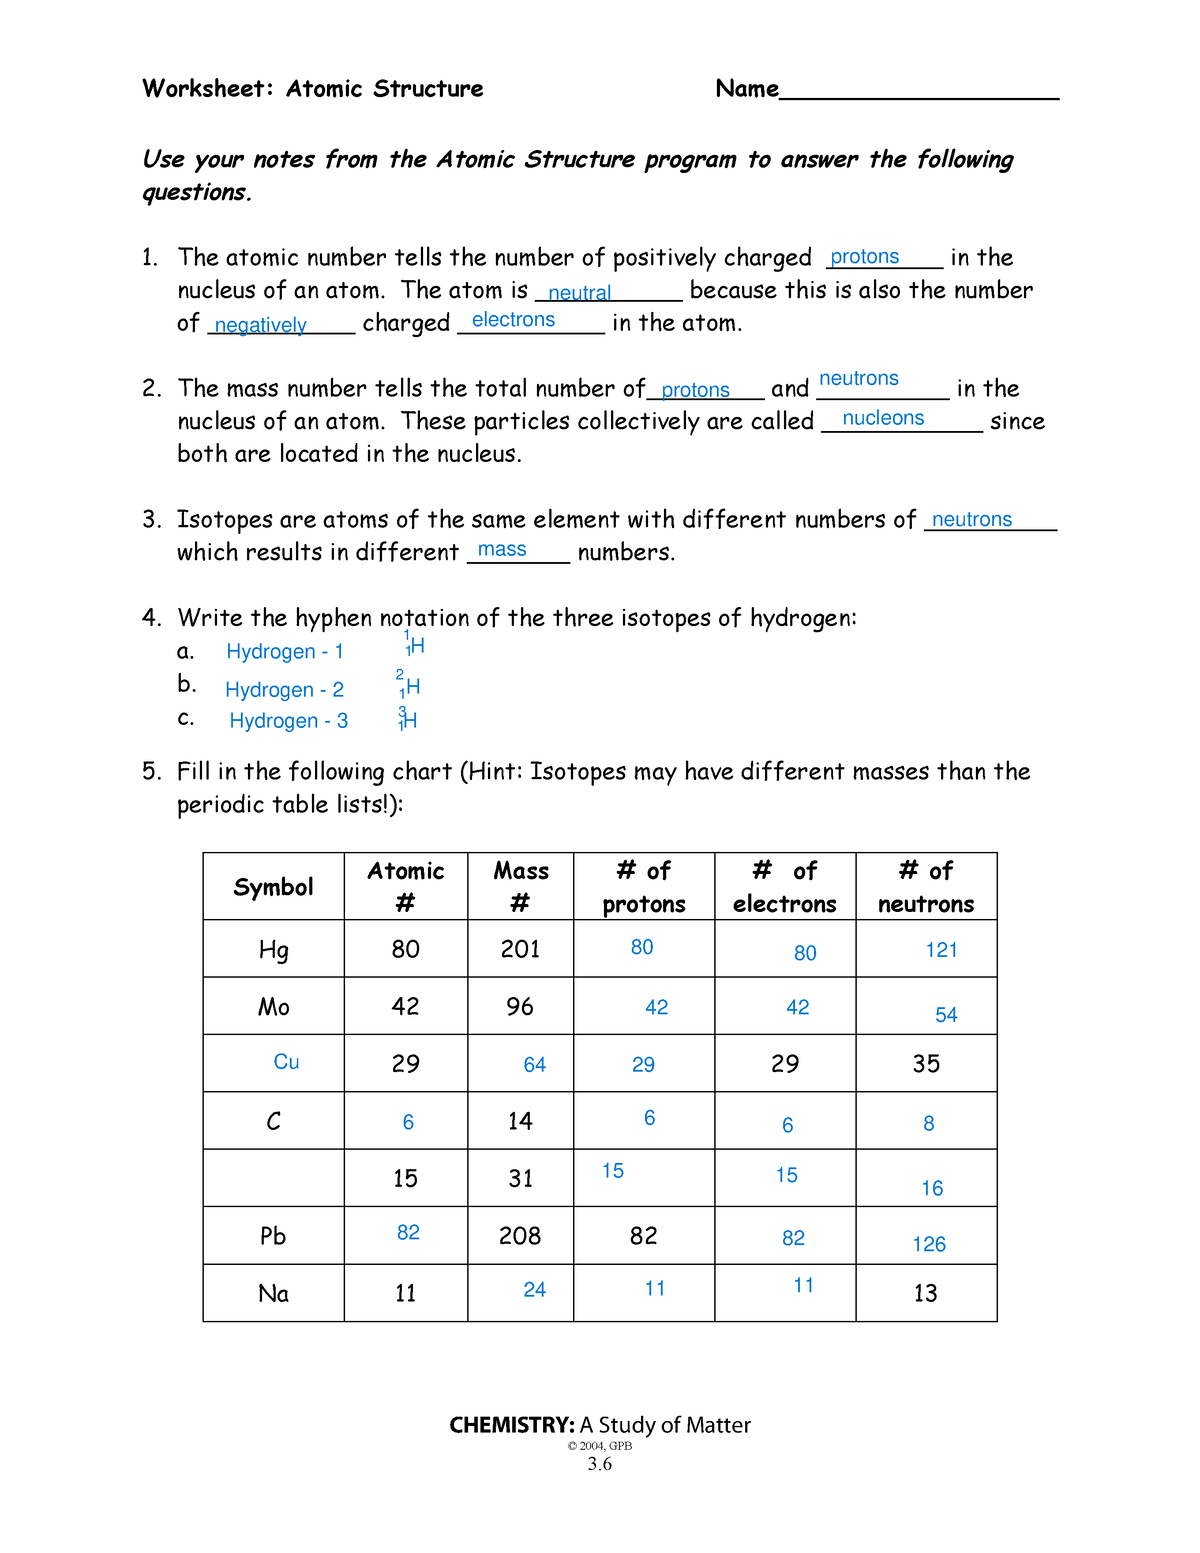 atomic-structure-wkst-science-worksheet-atomic-structure-name-chemistry